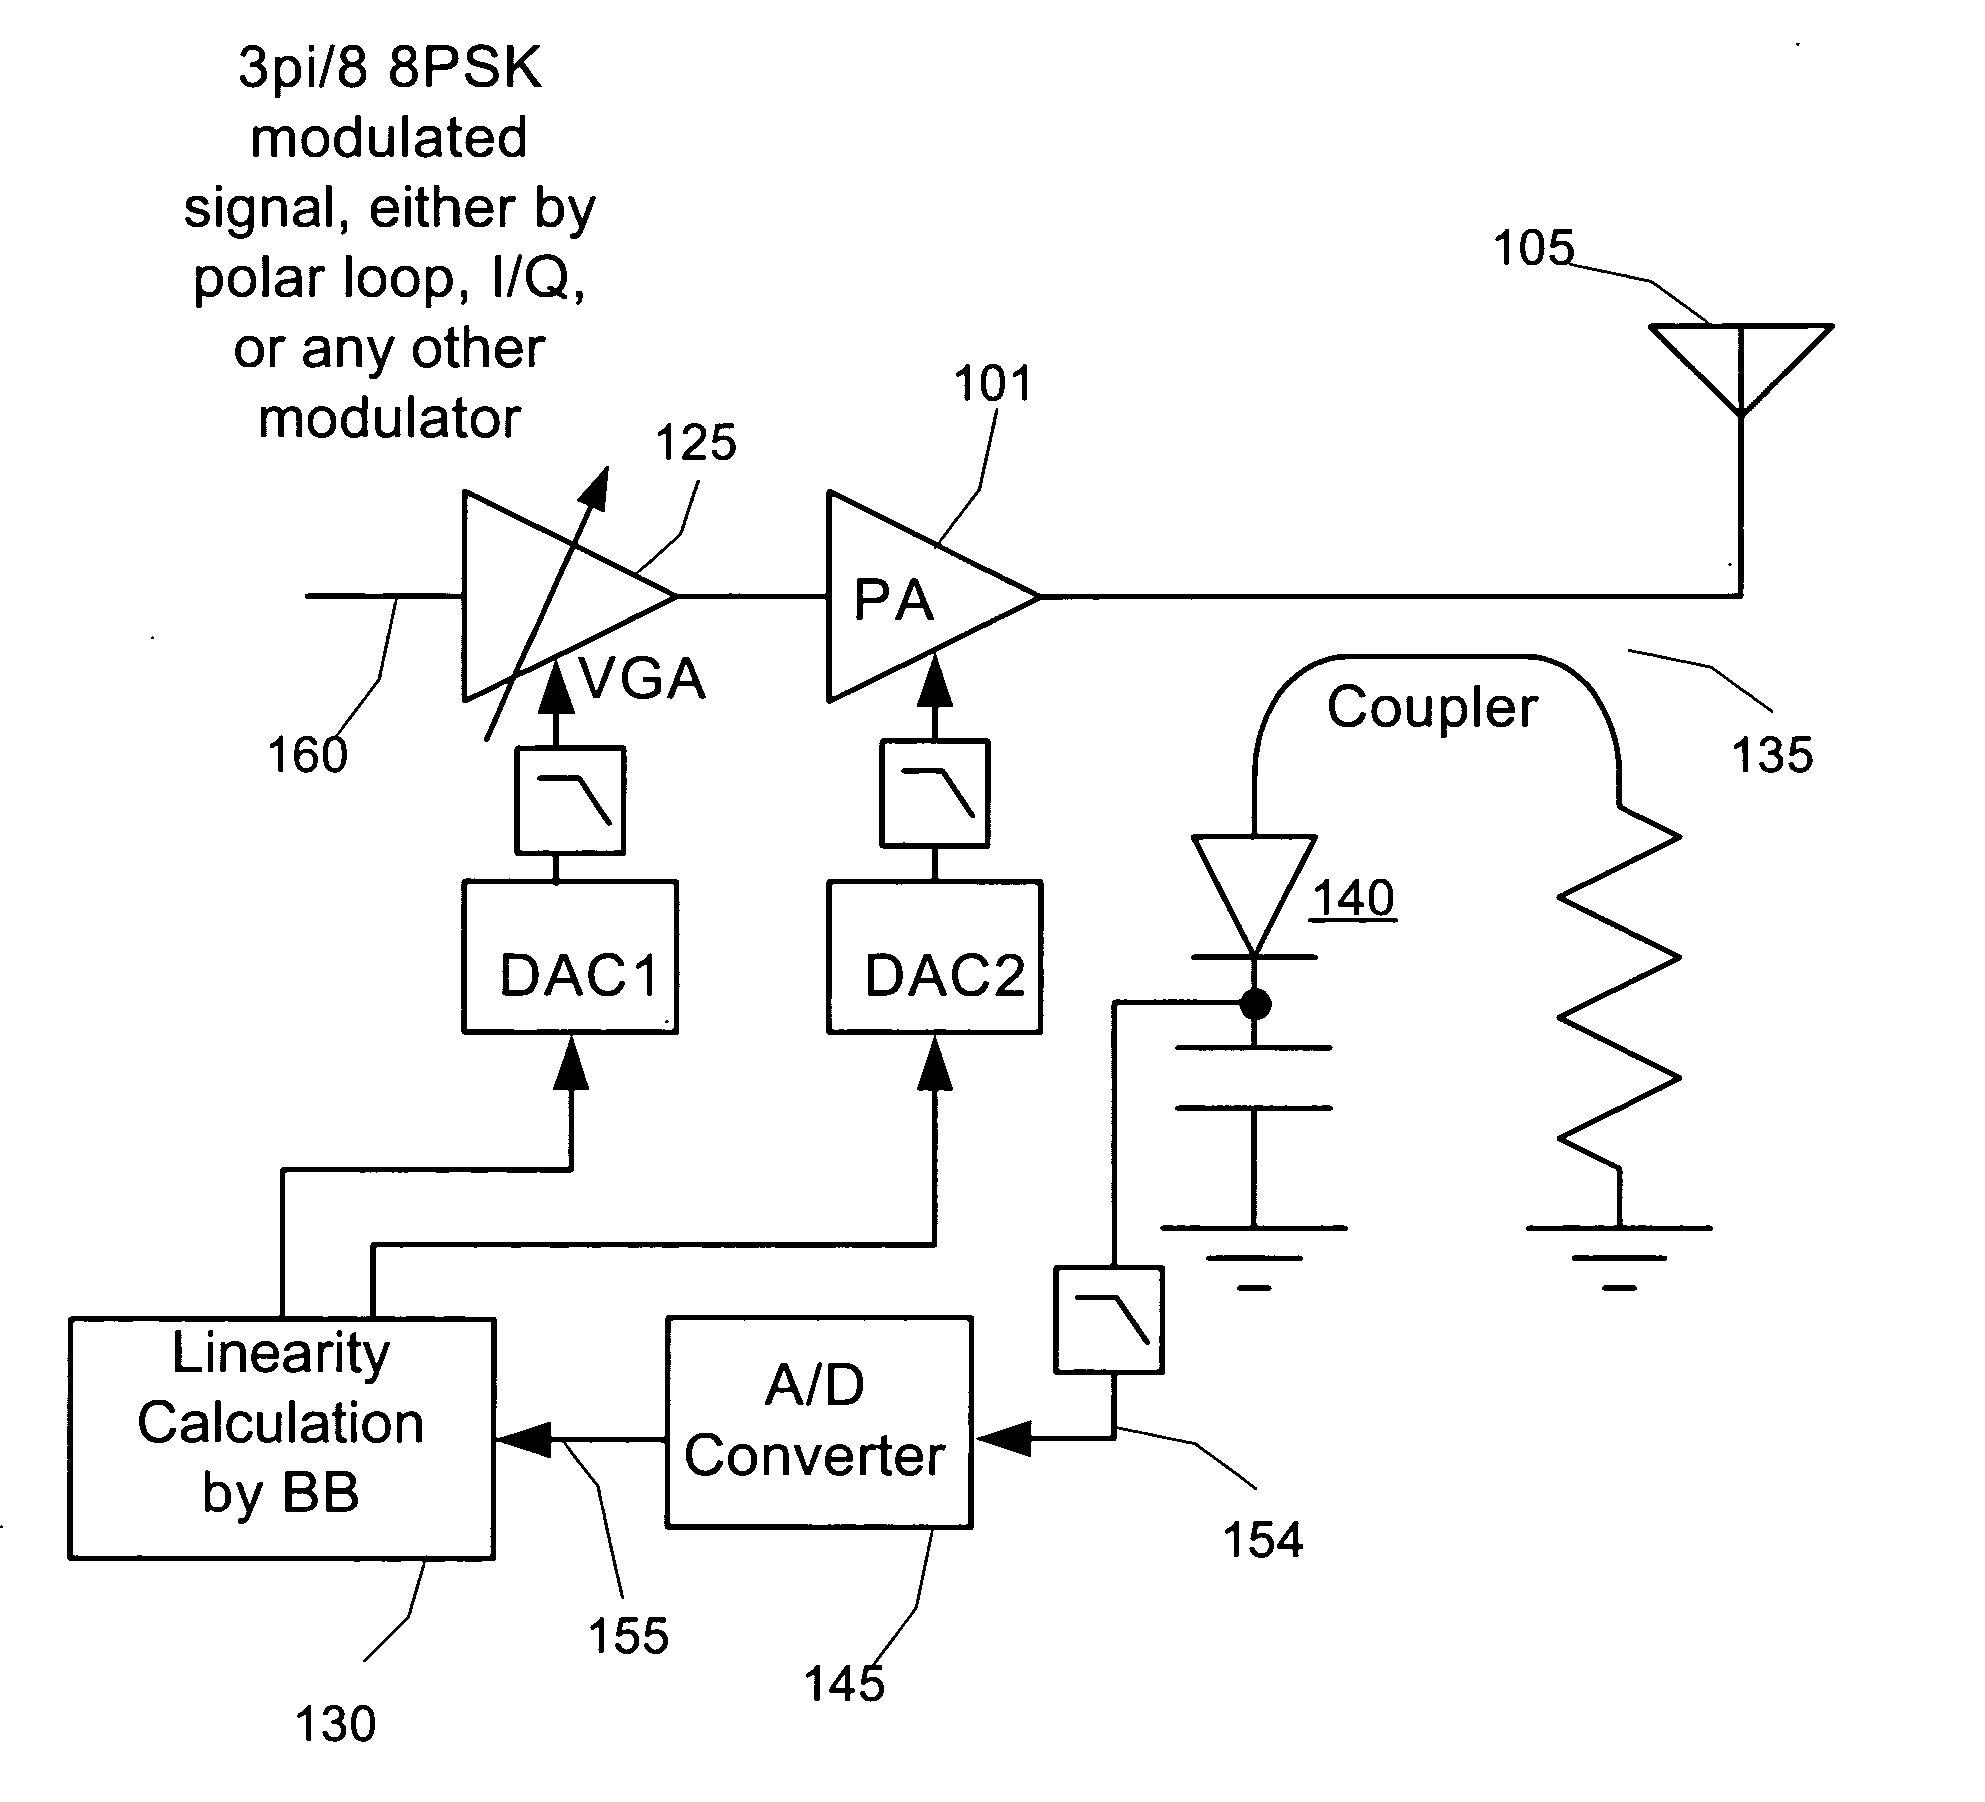 Detecting and maintaining linearity in a power amplifier system through comparing peak and RMS power levels